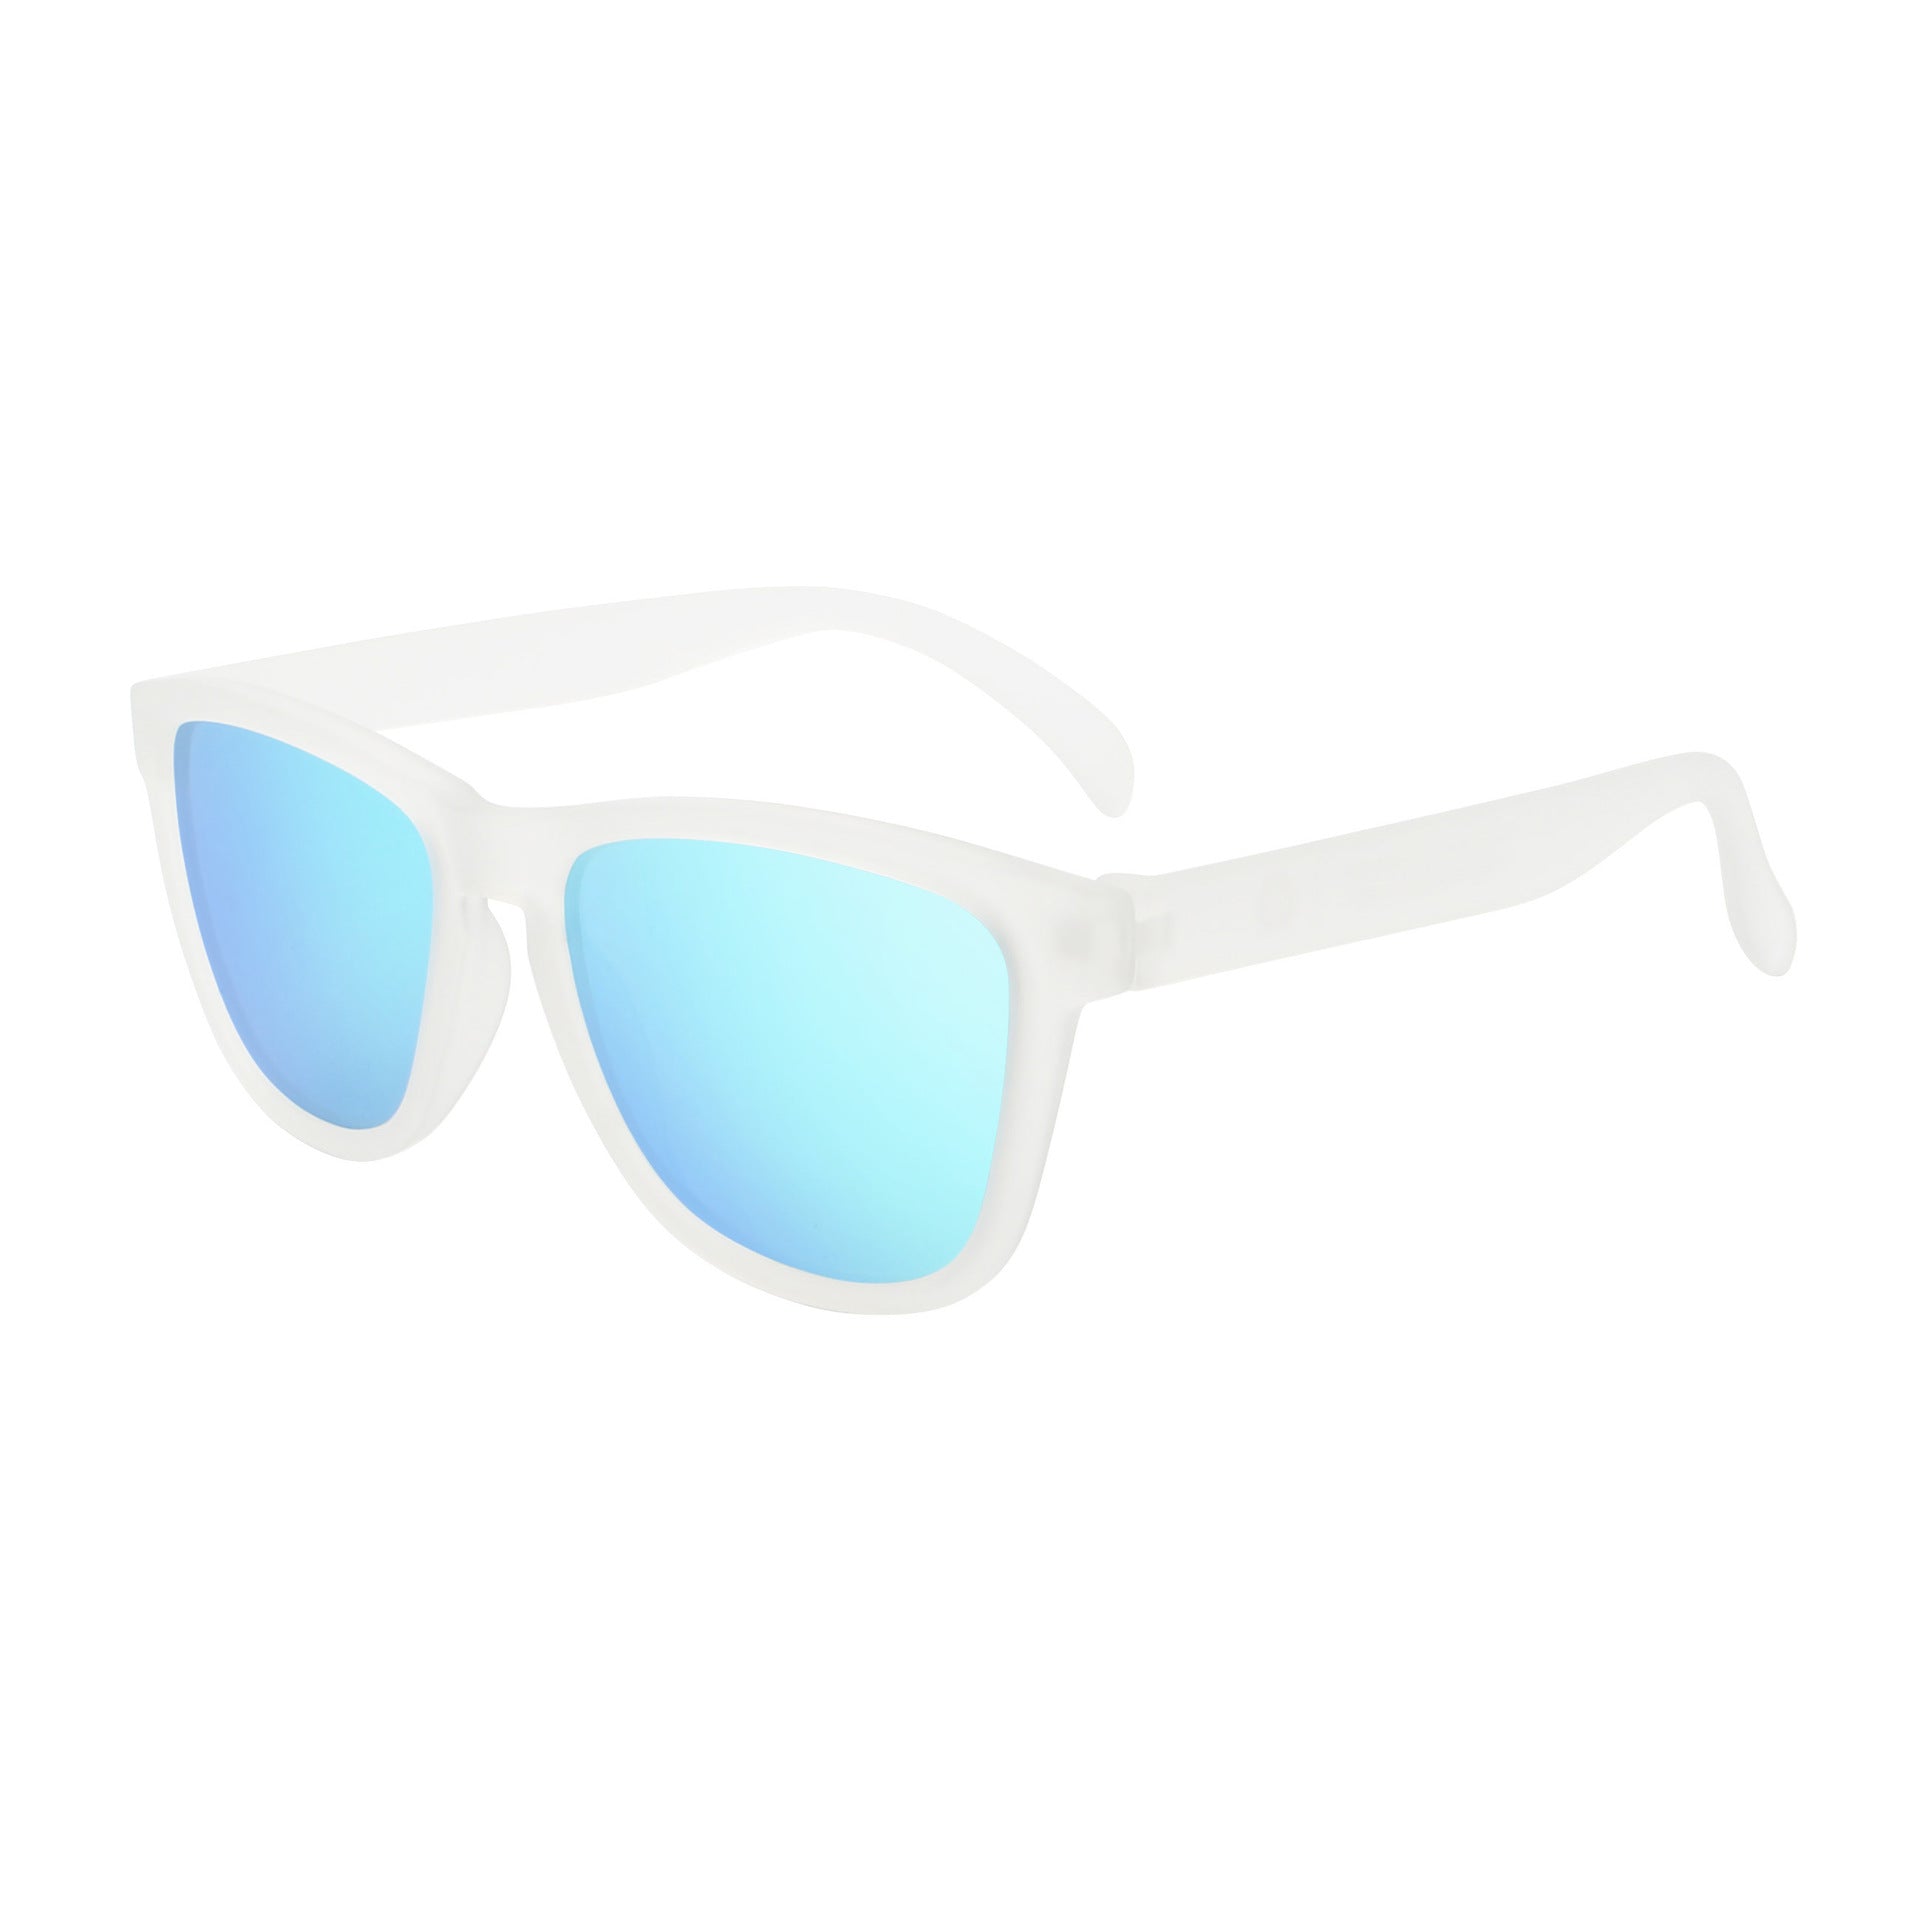 SP-5994 - Recycled Water Bottle Sunglasses